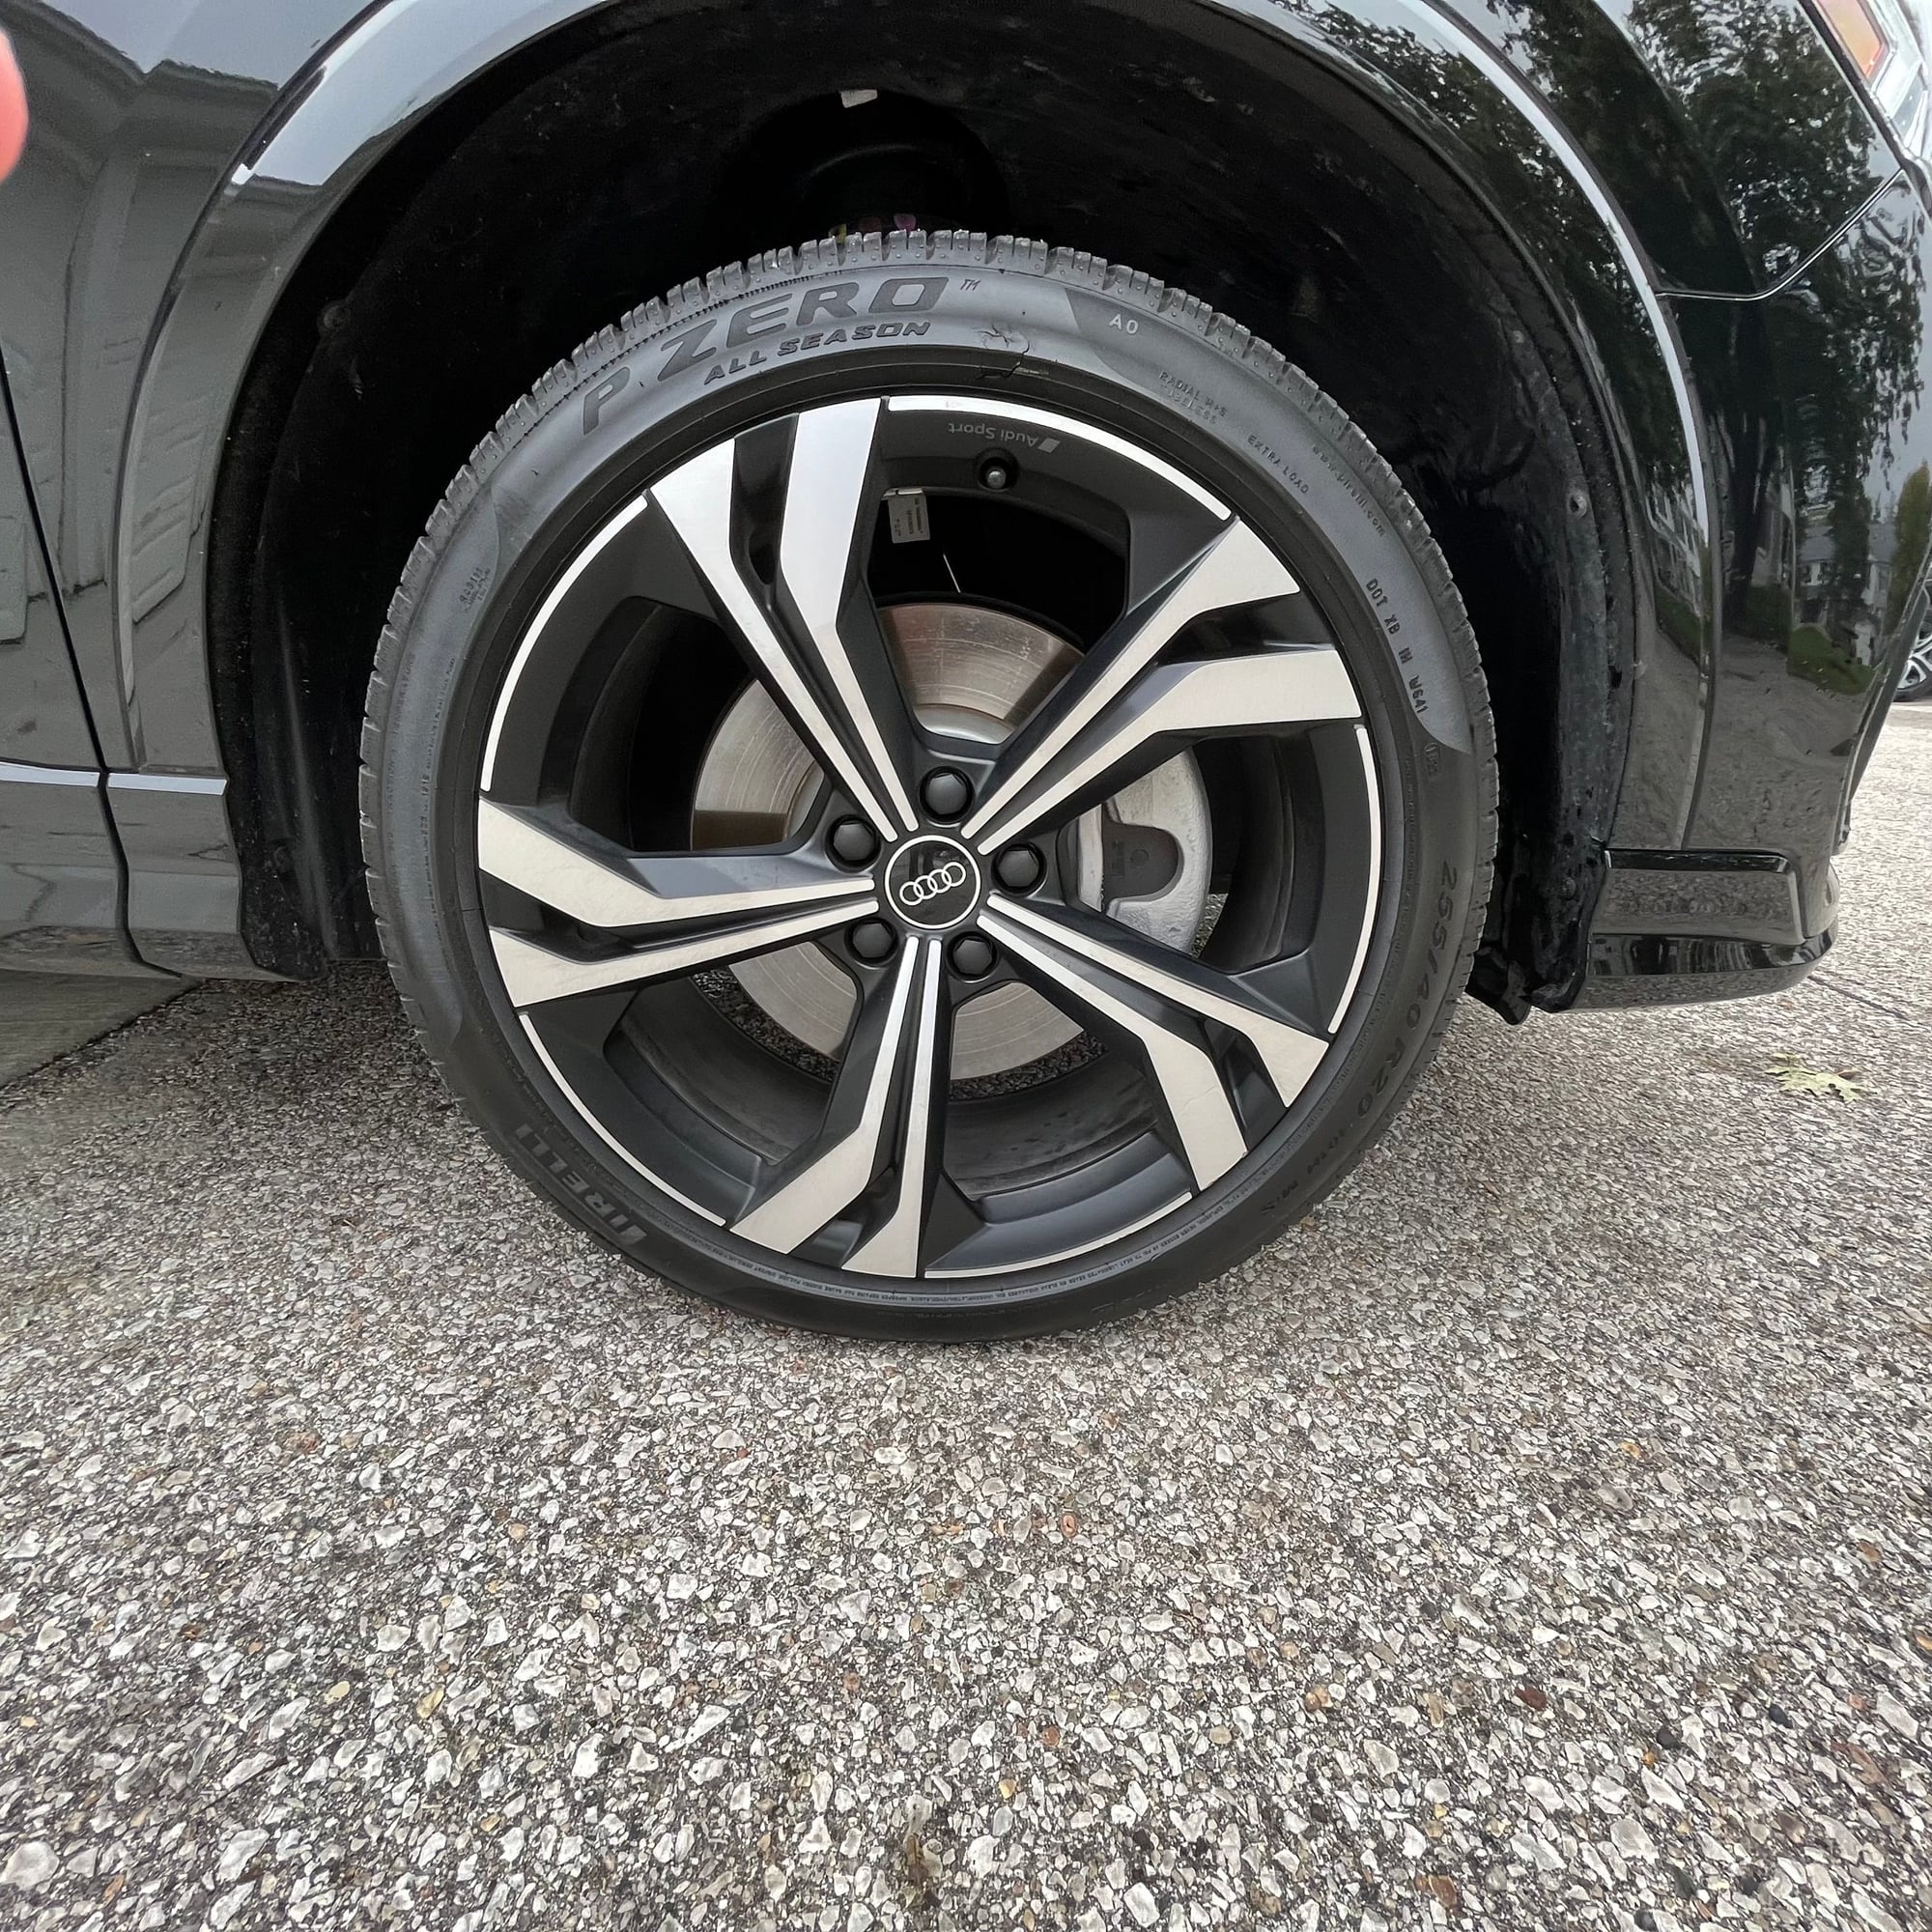 Wheels and Tires/Axles - For Sale 20' 2023 Audi Q3 Wheels & Tires. - Used - 2023 Audi Q3 Quattro - Fort Dodge, IA 50501, United States